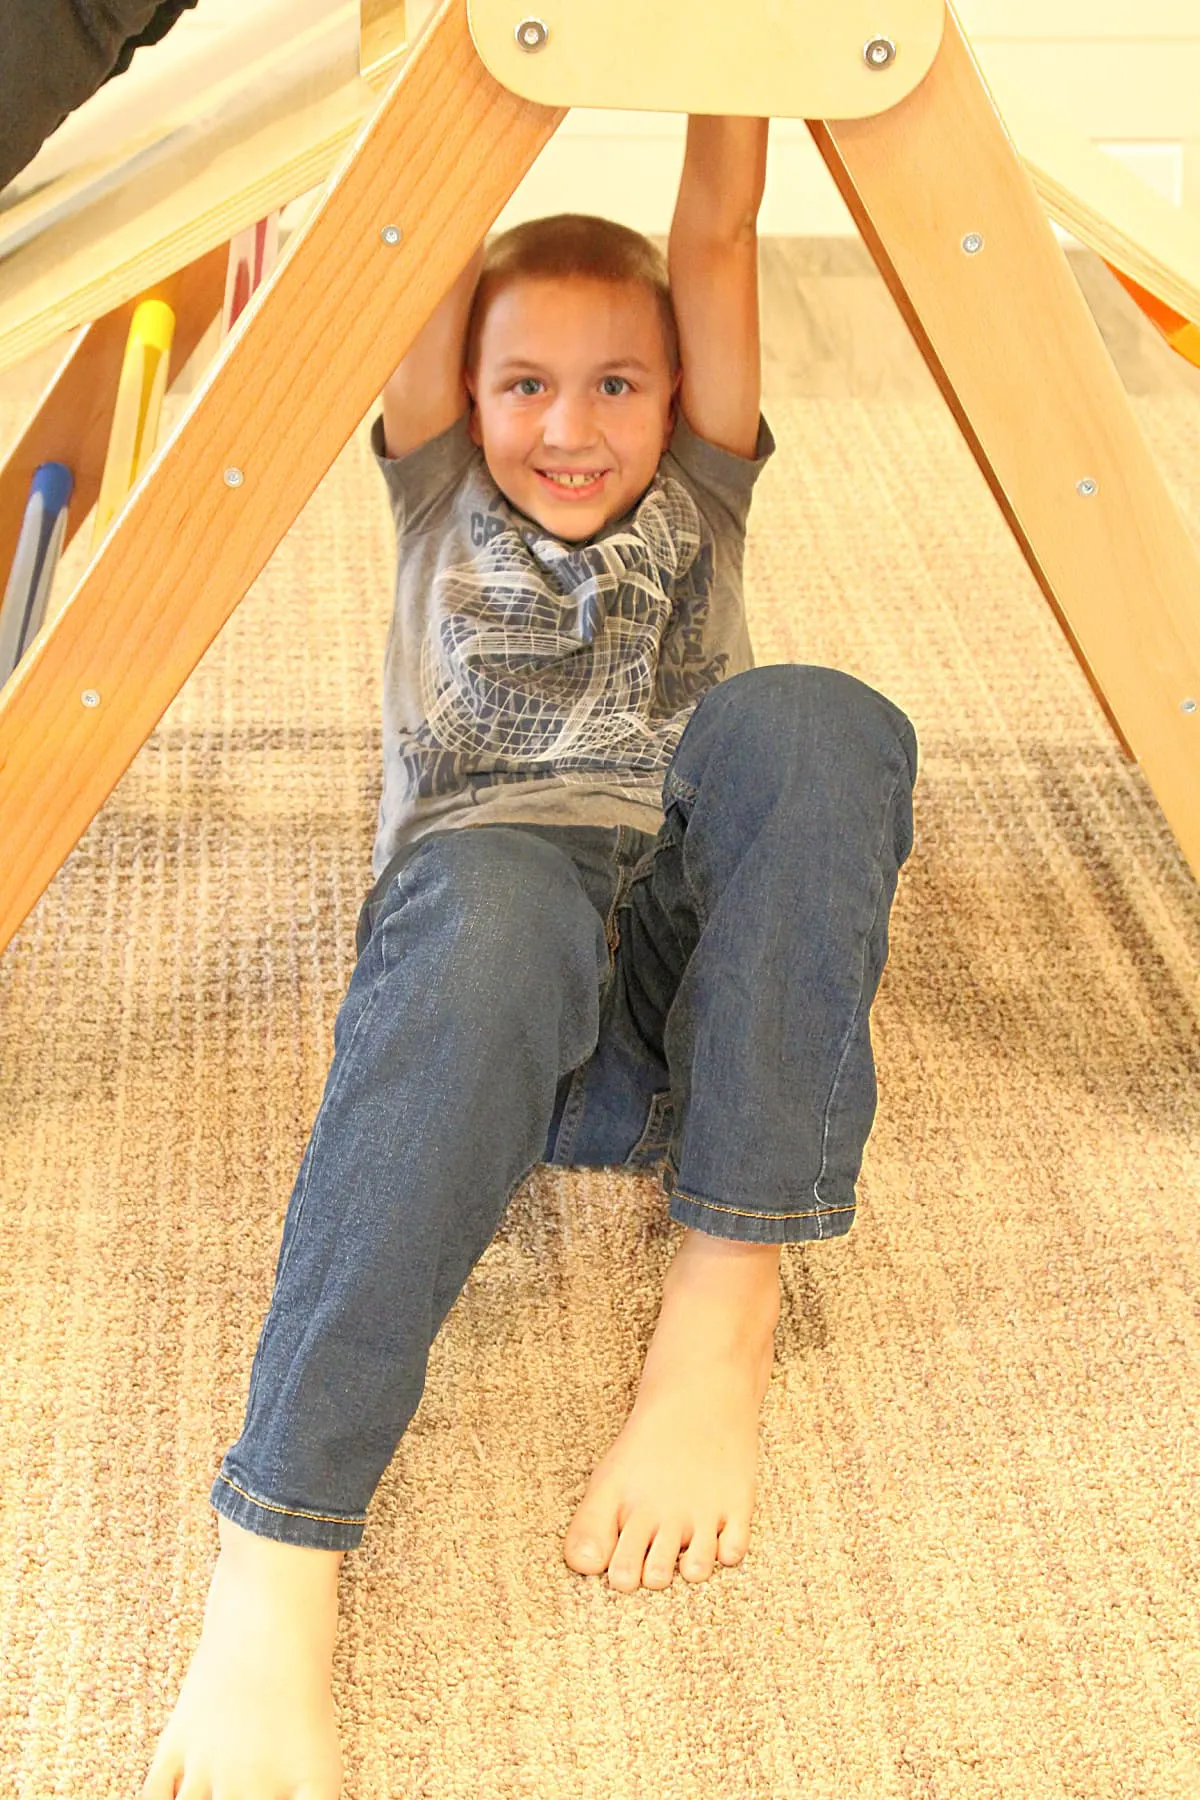 boy playing on climbing triangle 0 10 Activities To Do With A Piklar Triangle + Bunny Hopkins Review